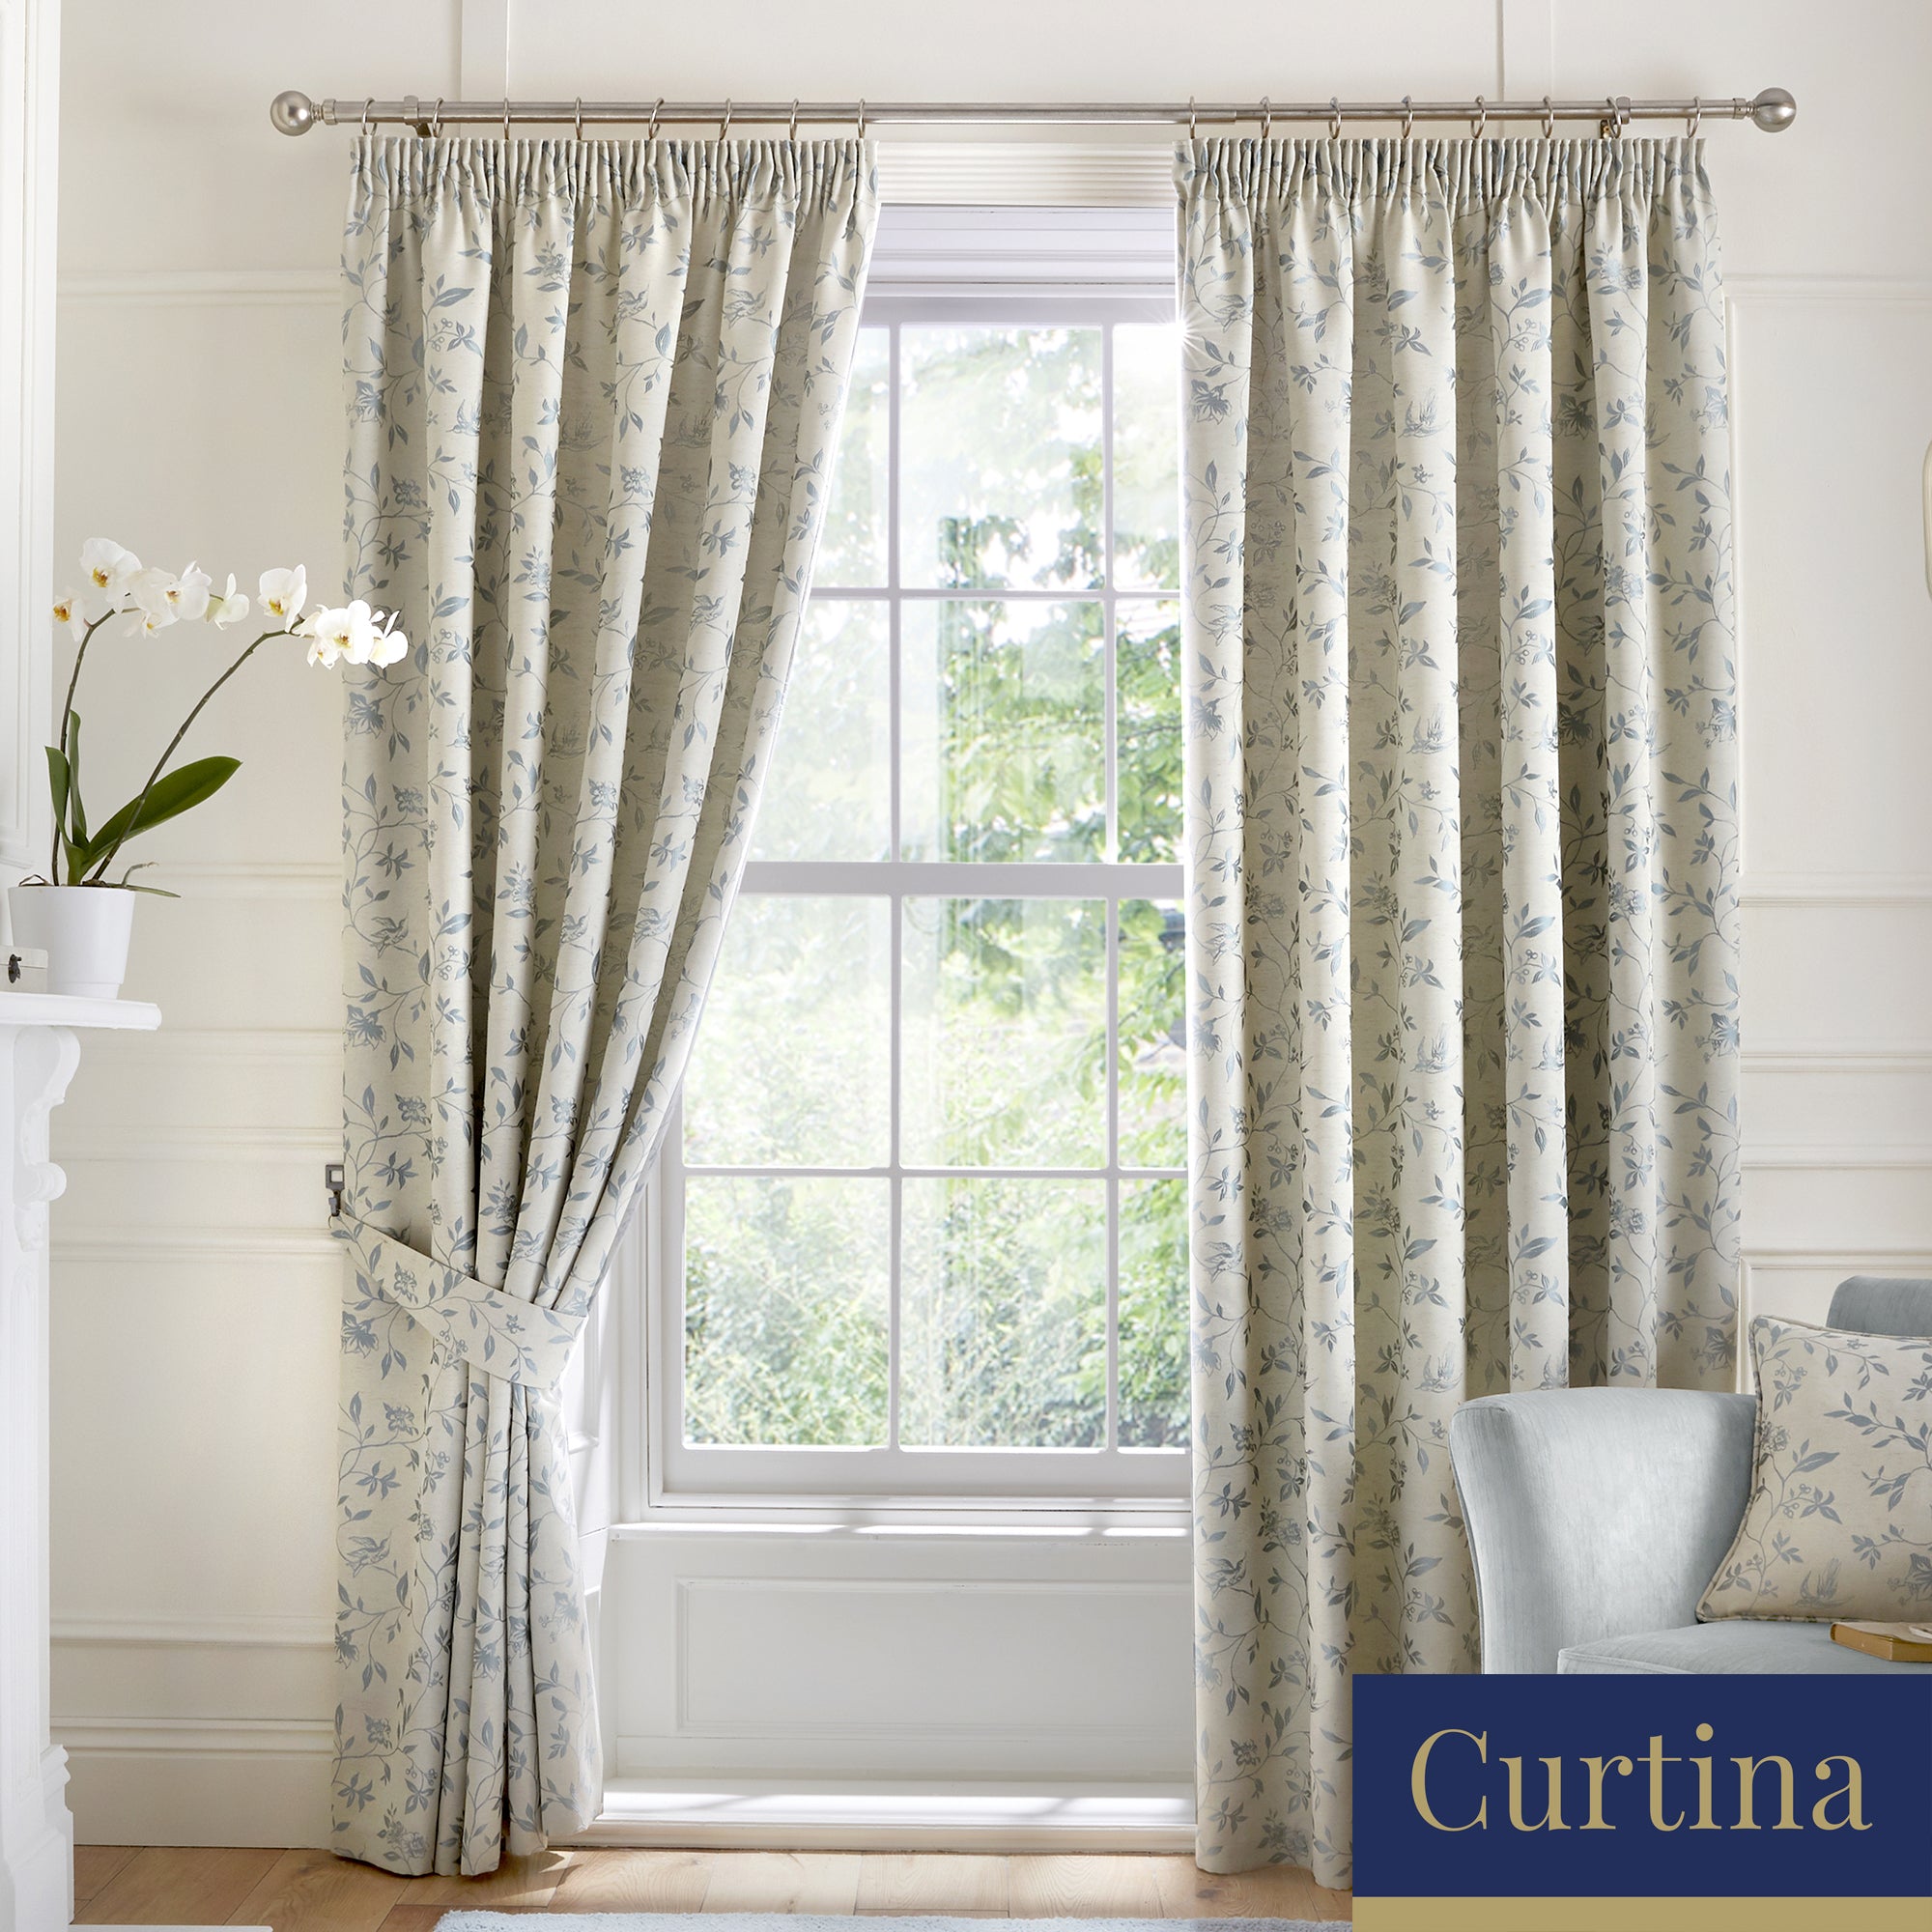 Bird Trail -  Jacquard Pencil Pleat Curtains in Duck Egg - By Curtina